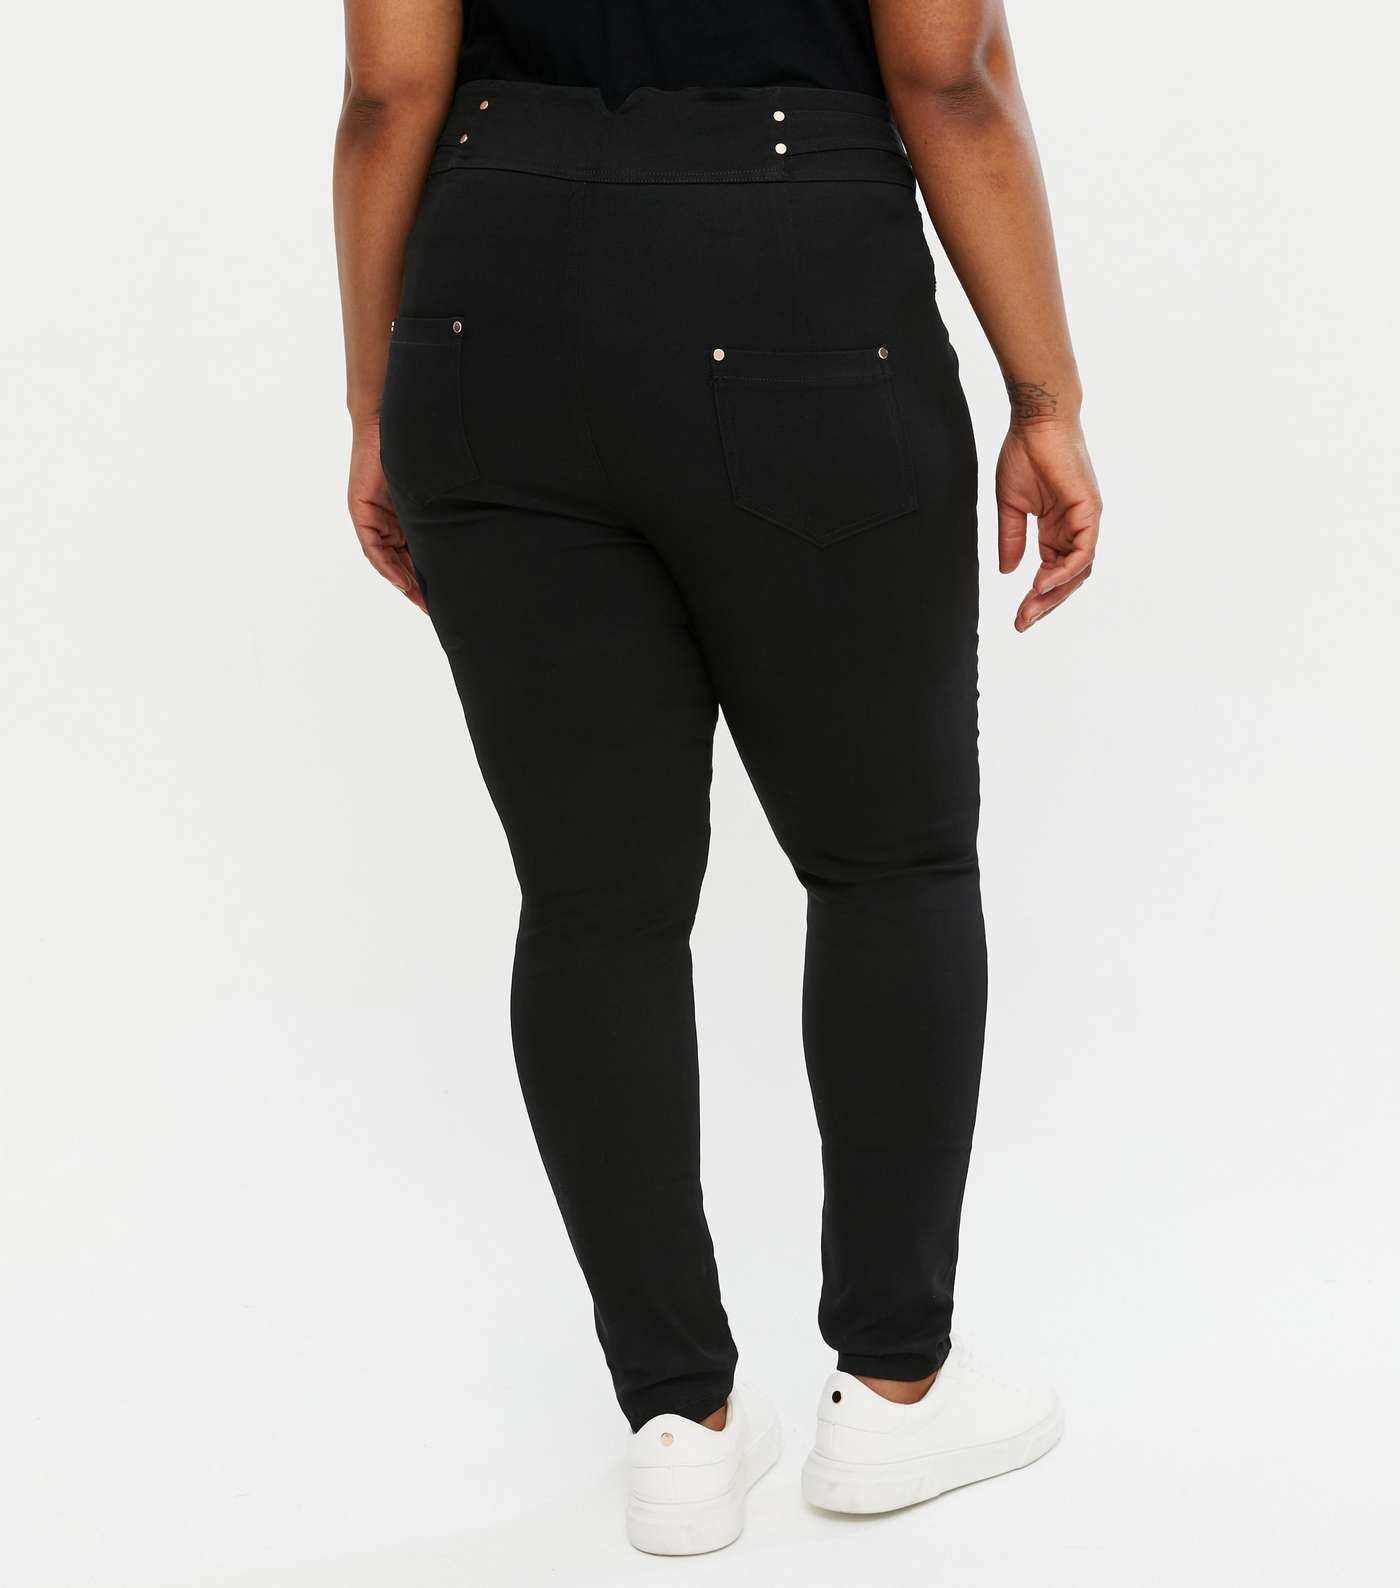 Blue Vanilla Curves Black Double Button Skinny Jeans Image 4